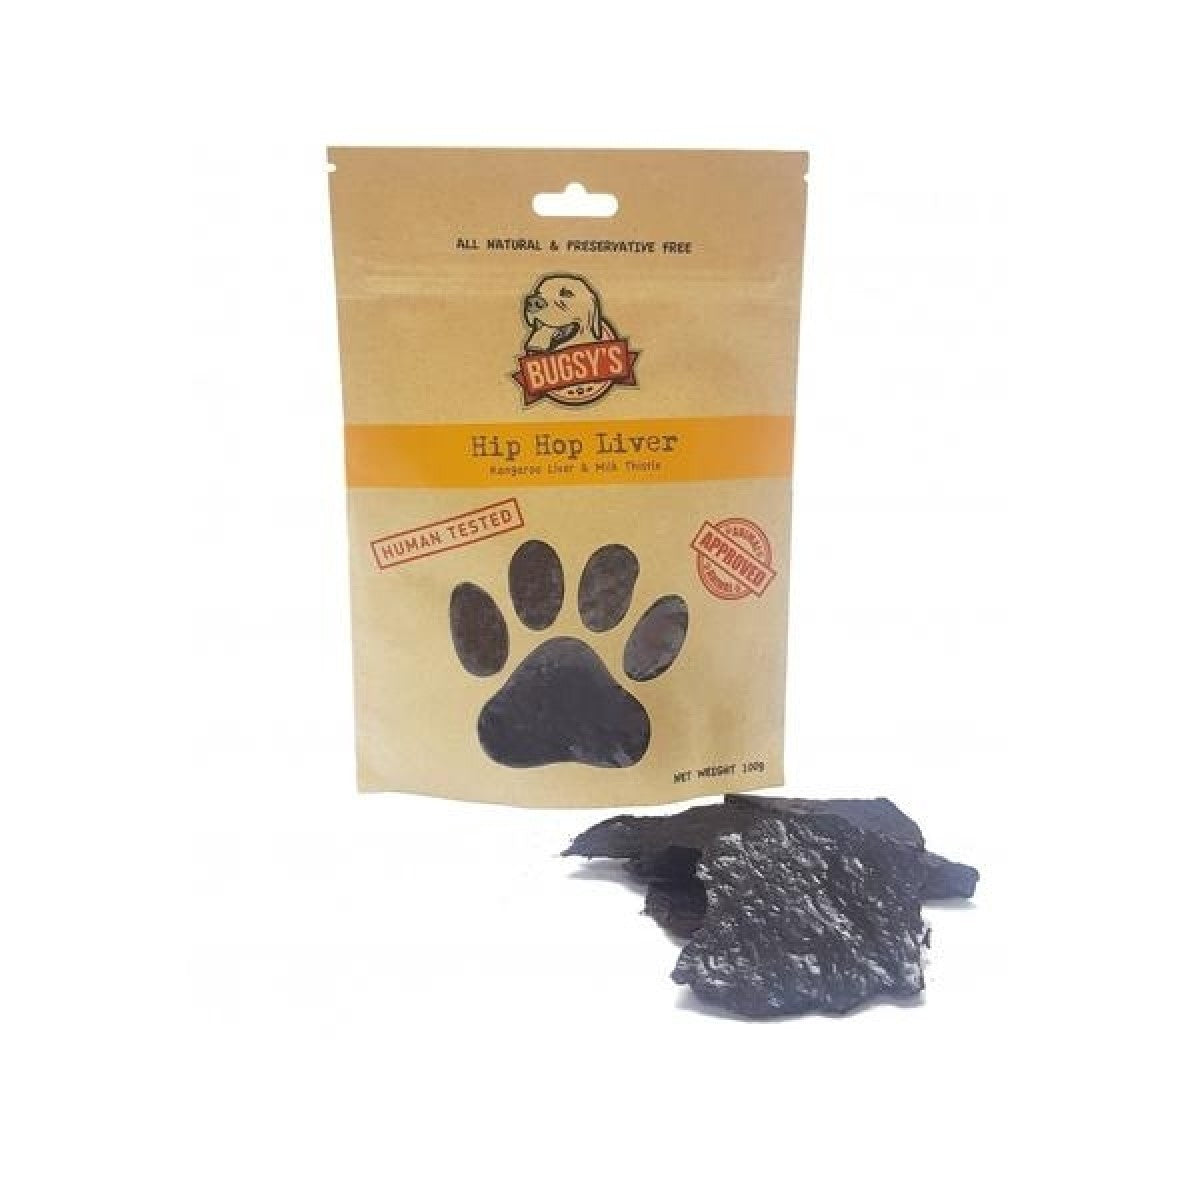 Bugsy's Dog Treats - Hip Hop Liver with Milk Thistle 70g